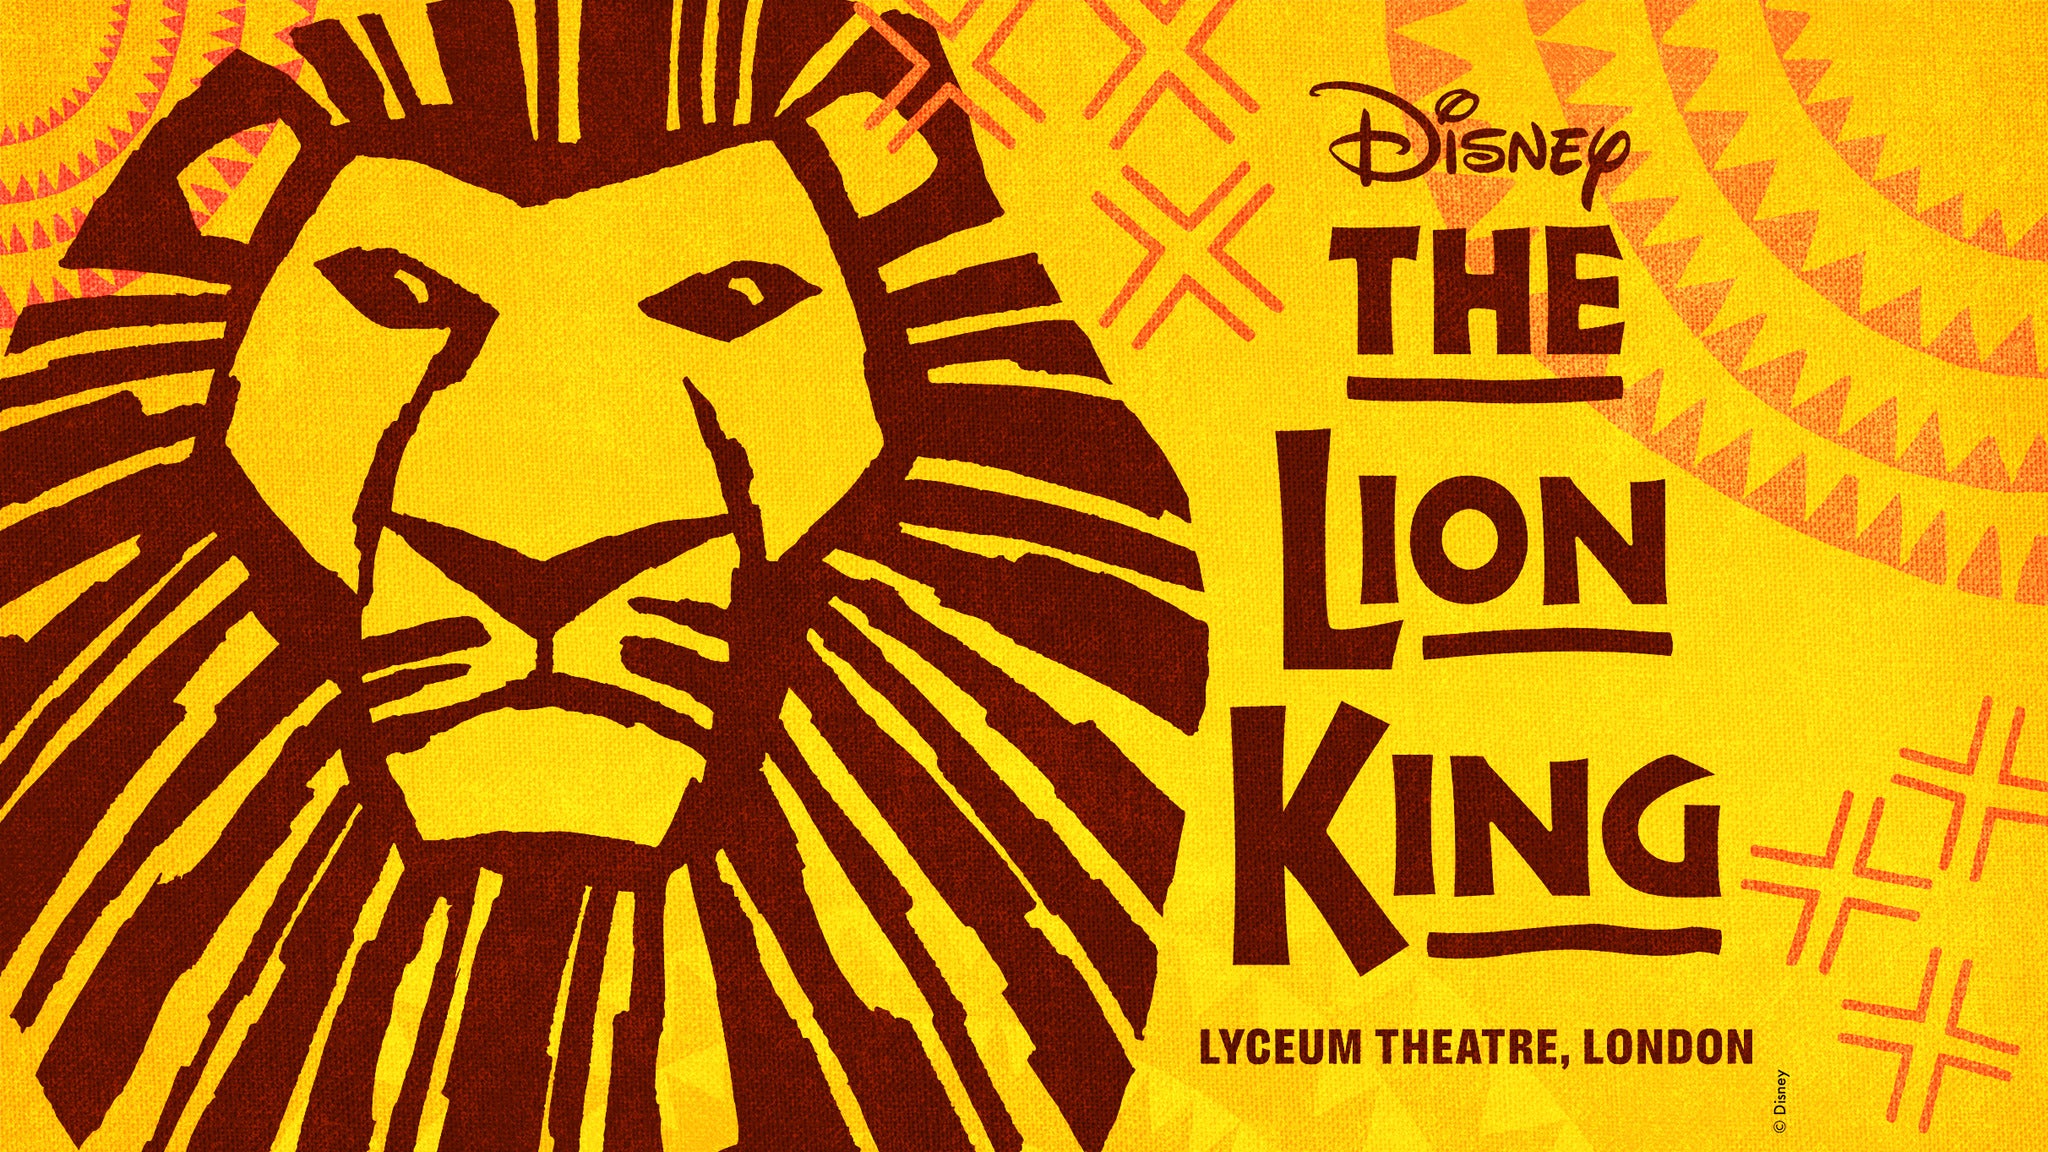 Disney's The Lion King (UK) Event Title Pic